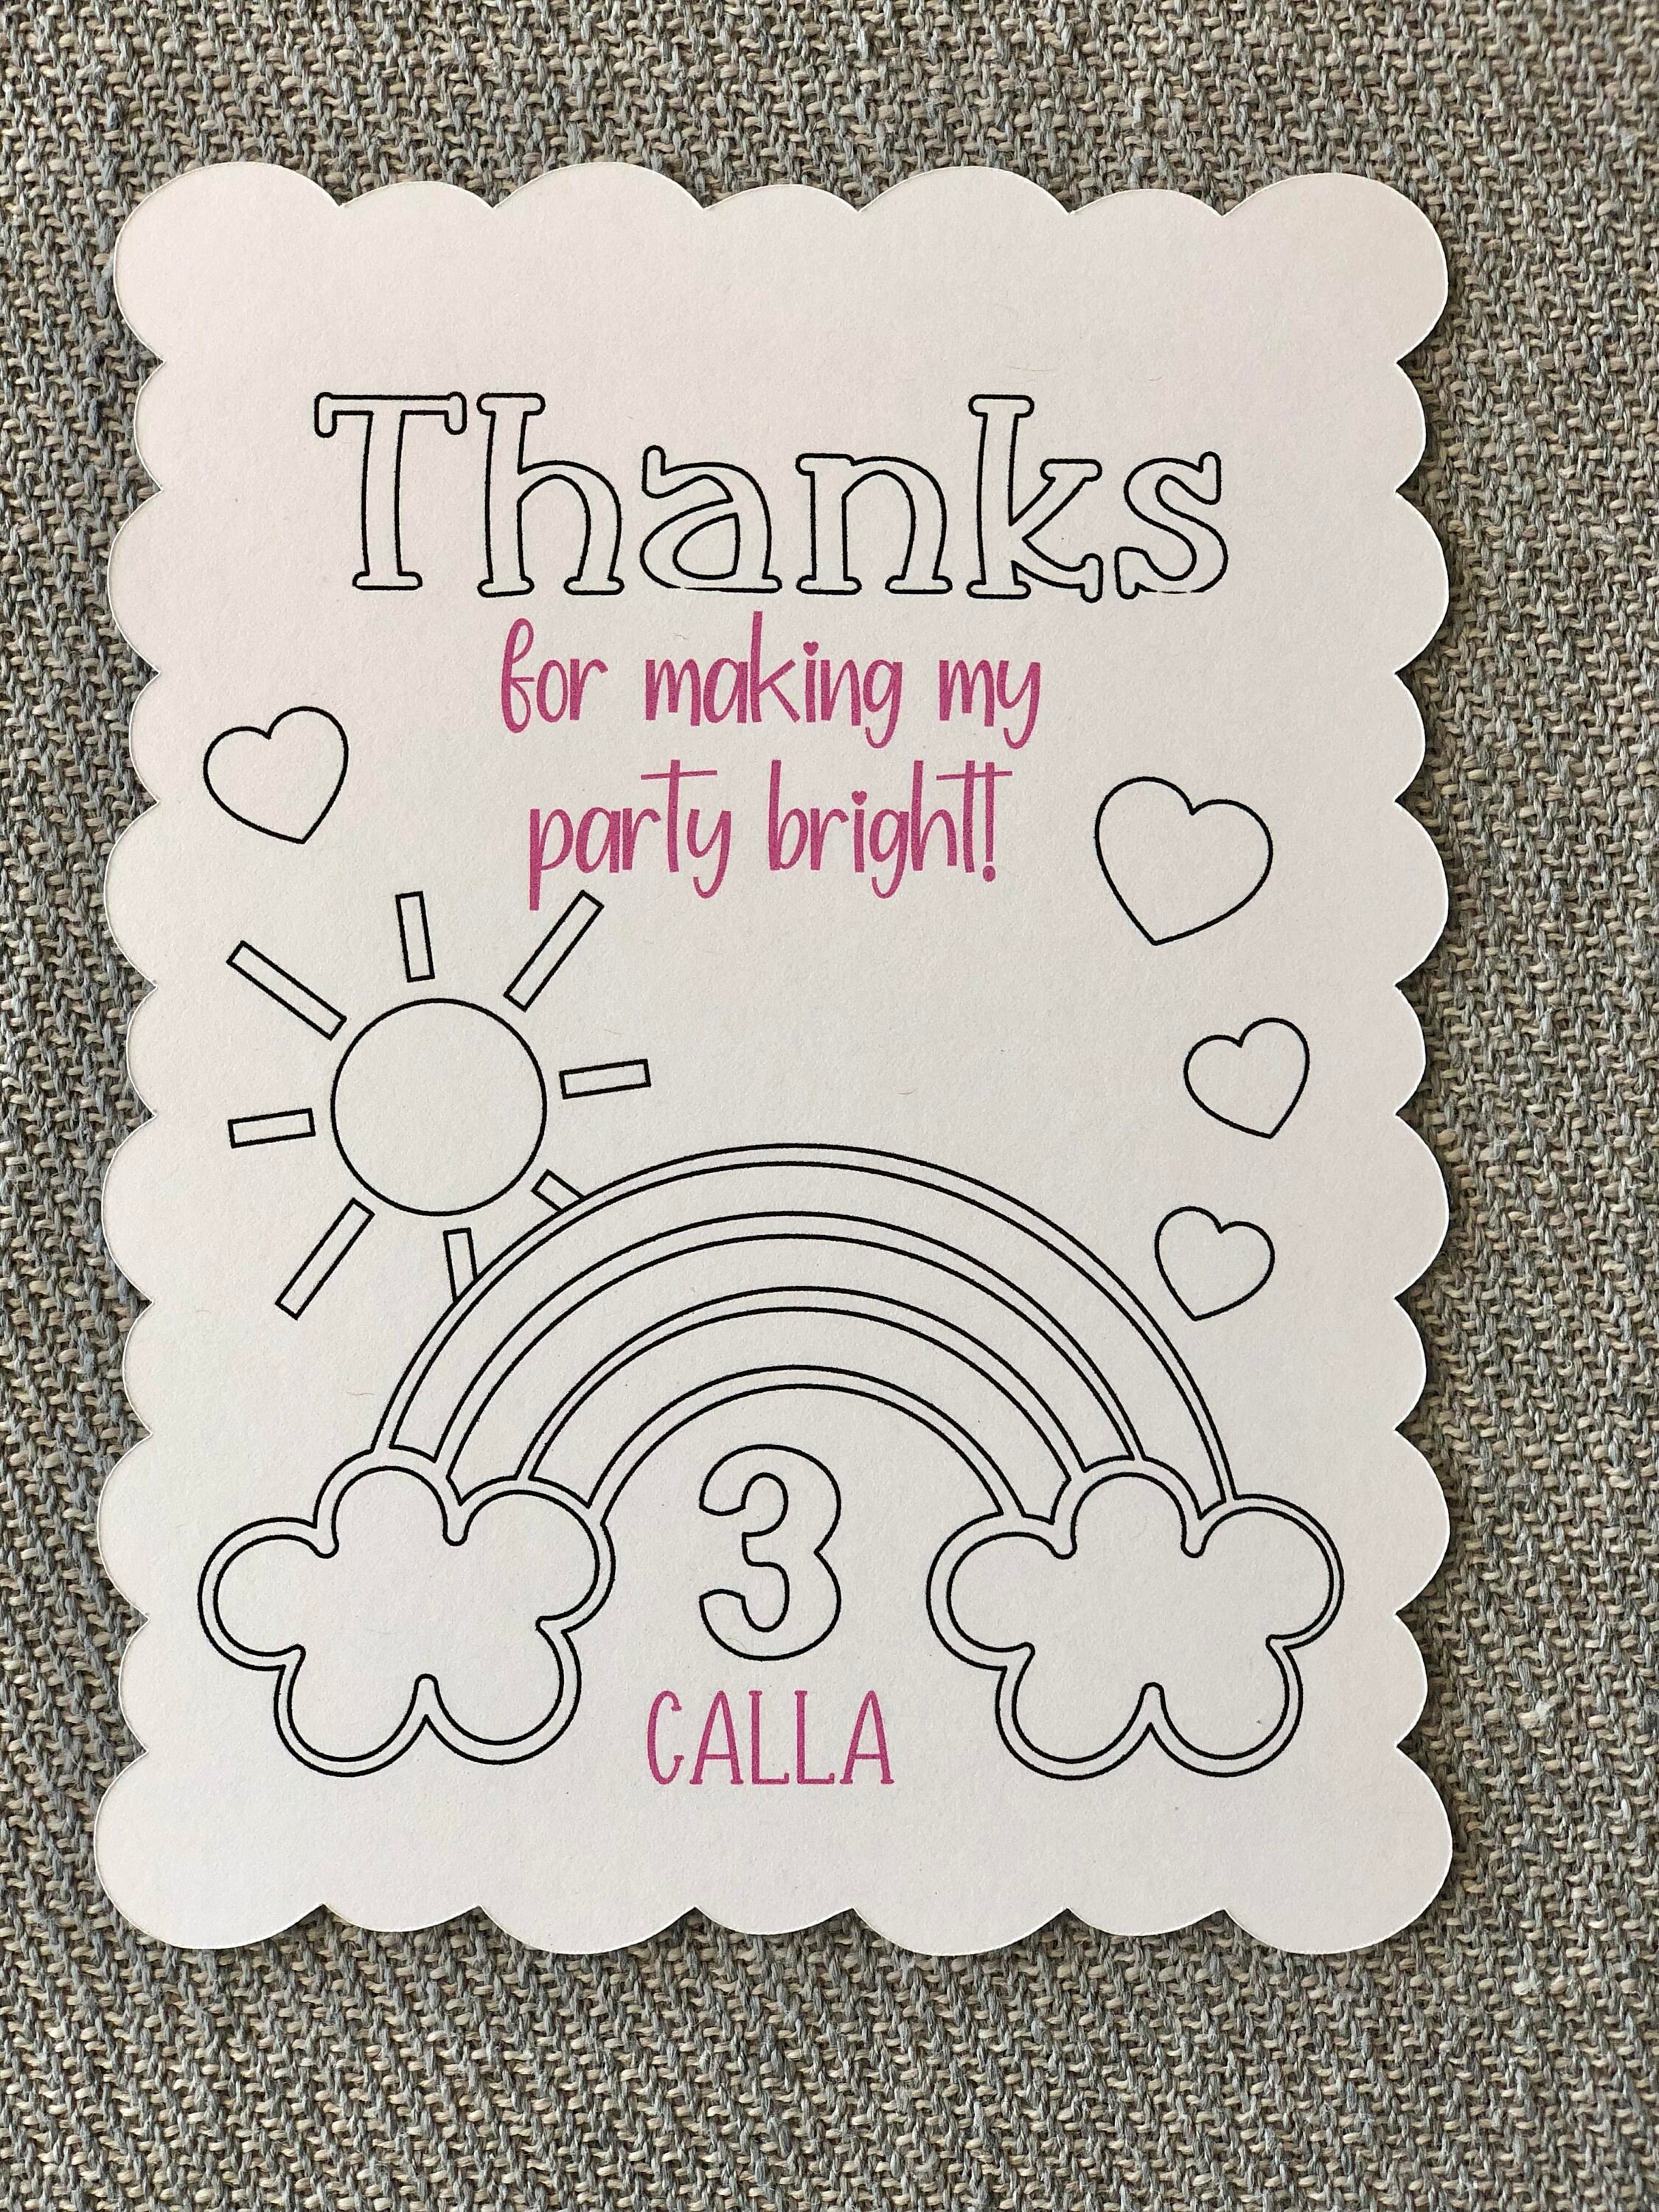 Rainbow Watercolor Party Favorspersonalized, Printed & Assembled Watercolor  Paint Set and Thank You Card 